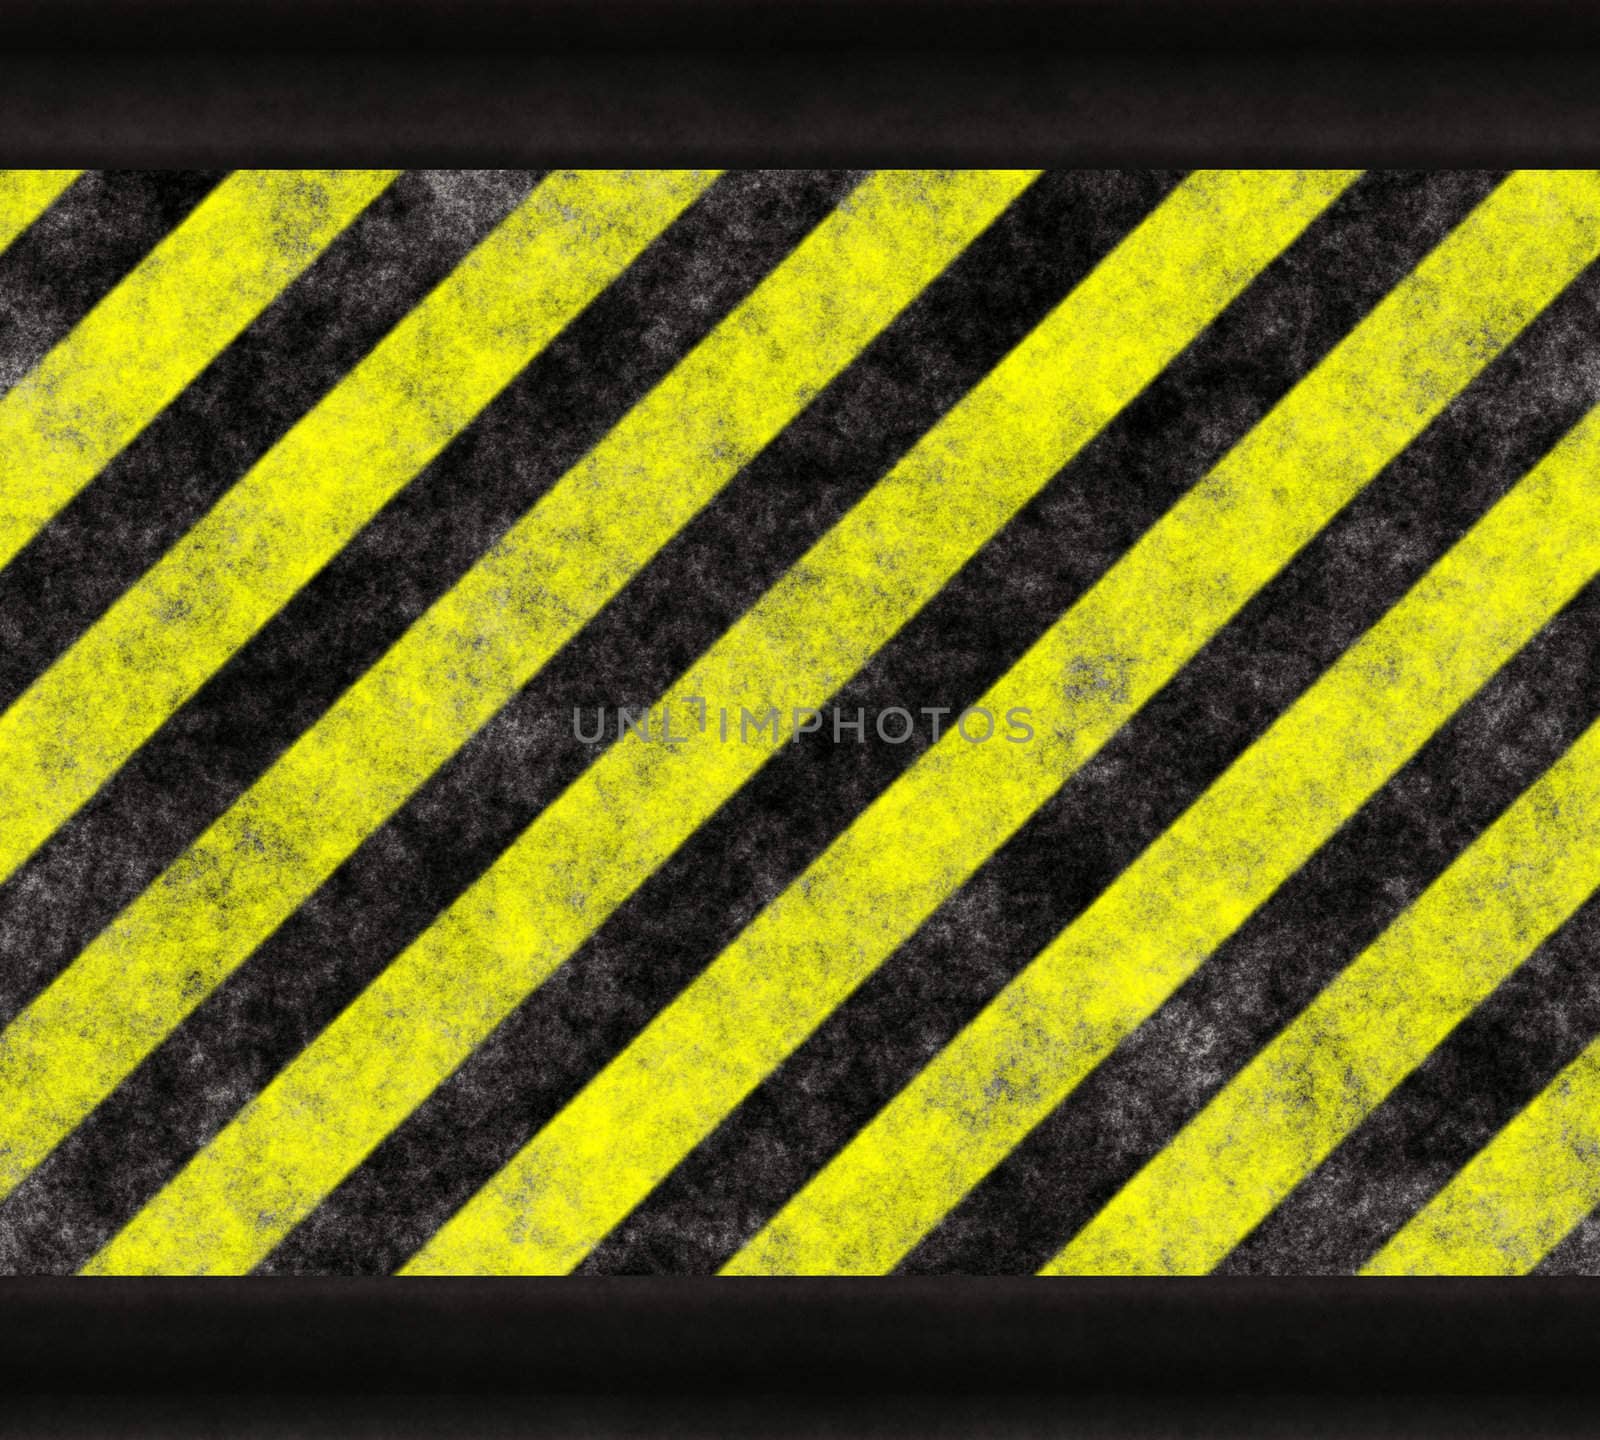 Black and yellow warning / hazard background with black frame